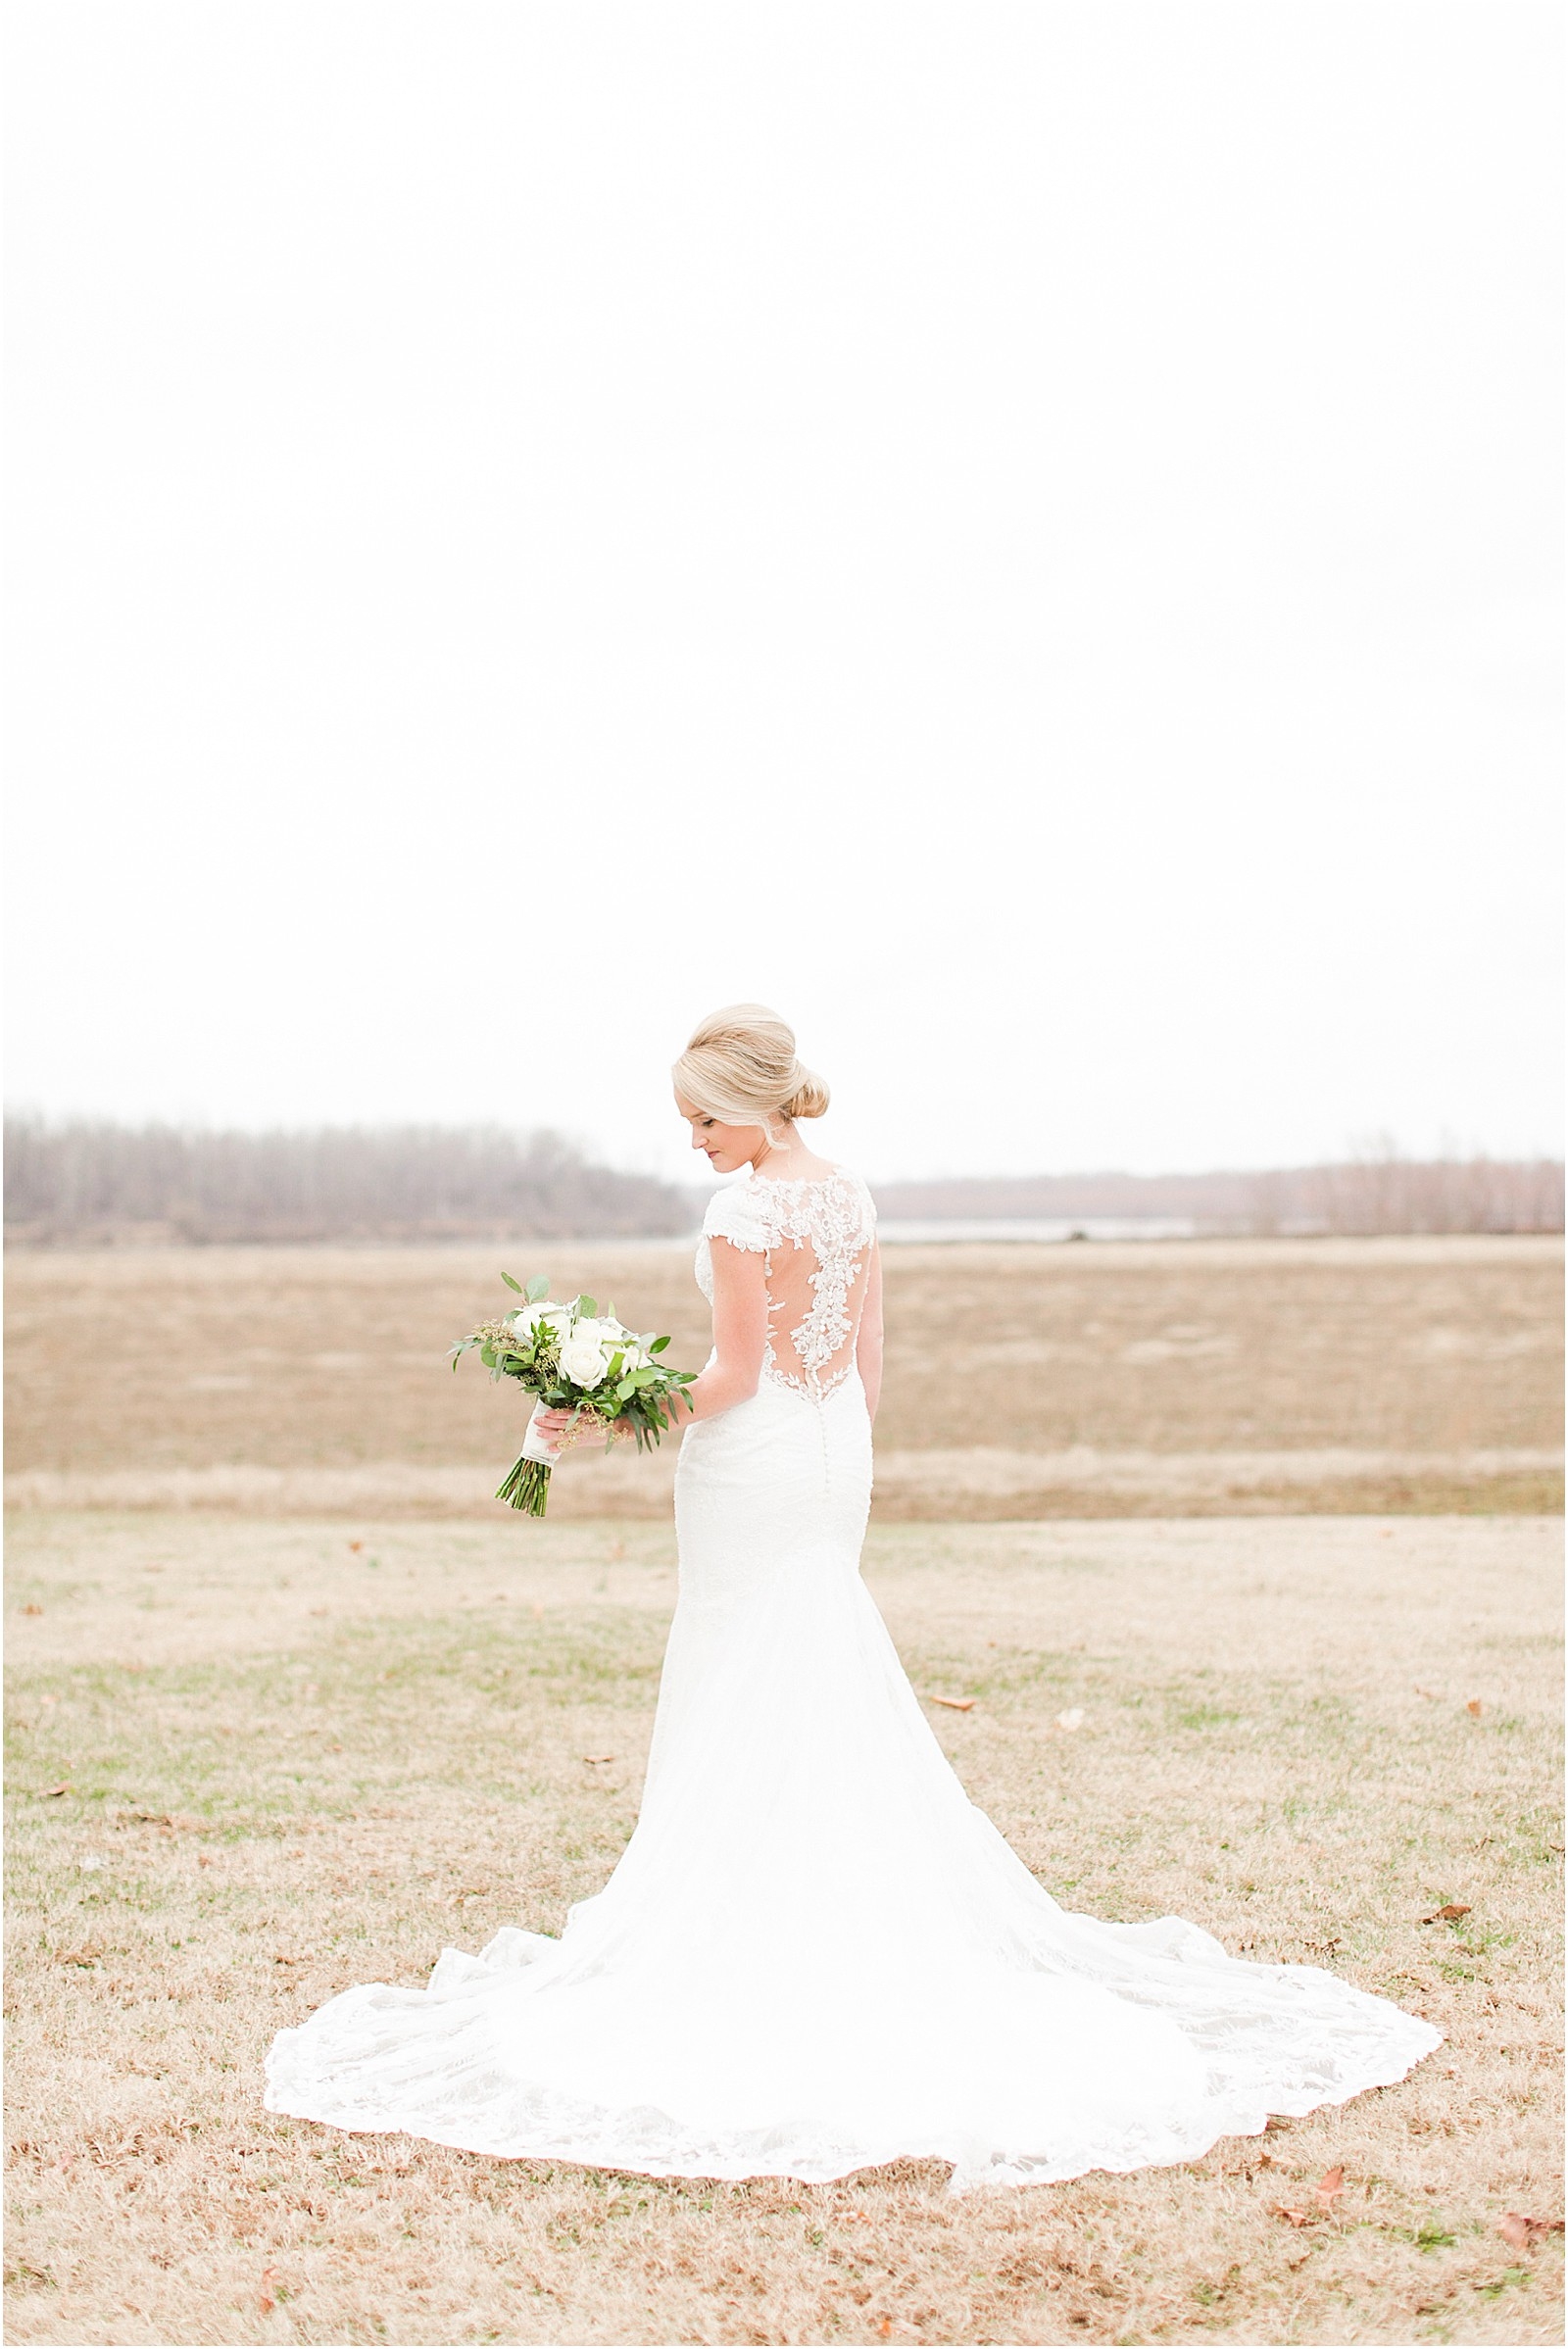 A Classic Winter Wedding in New Harmony | Rachel and Ryan | Bret and Brandie Photography 0089.jpg